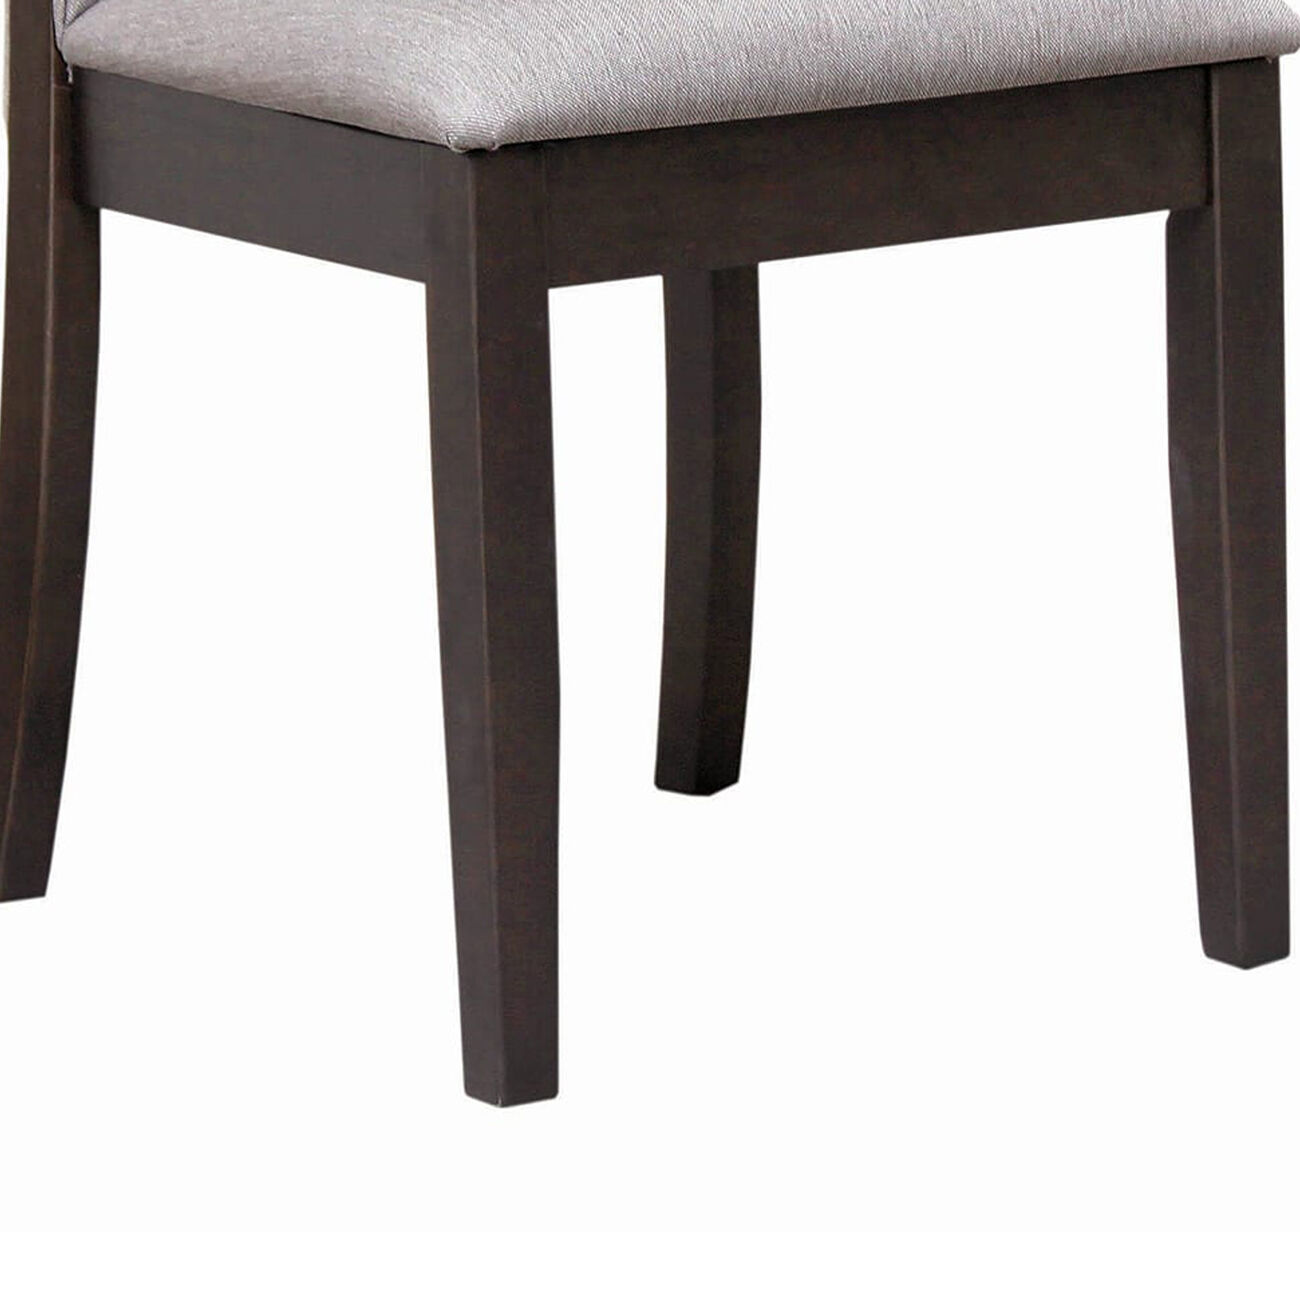 Fabric Upholstered Wooden Dining Chair, Set of 2, Gray and Brown